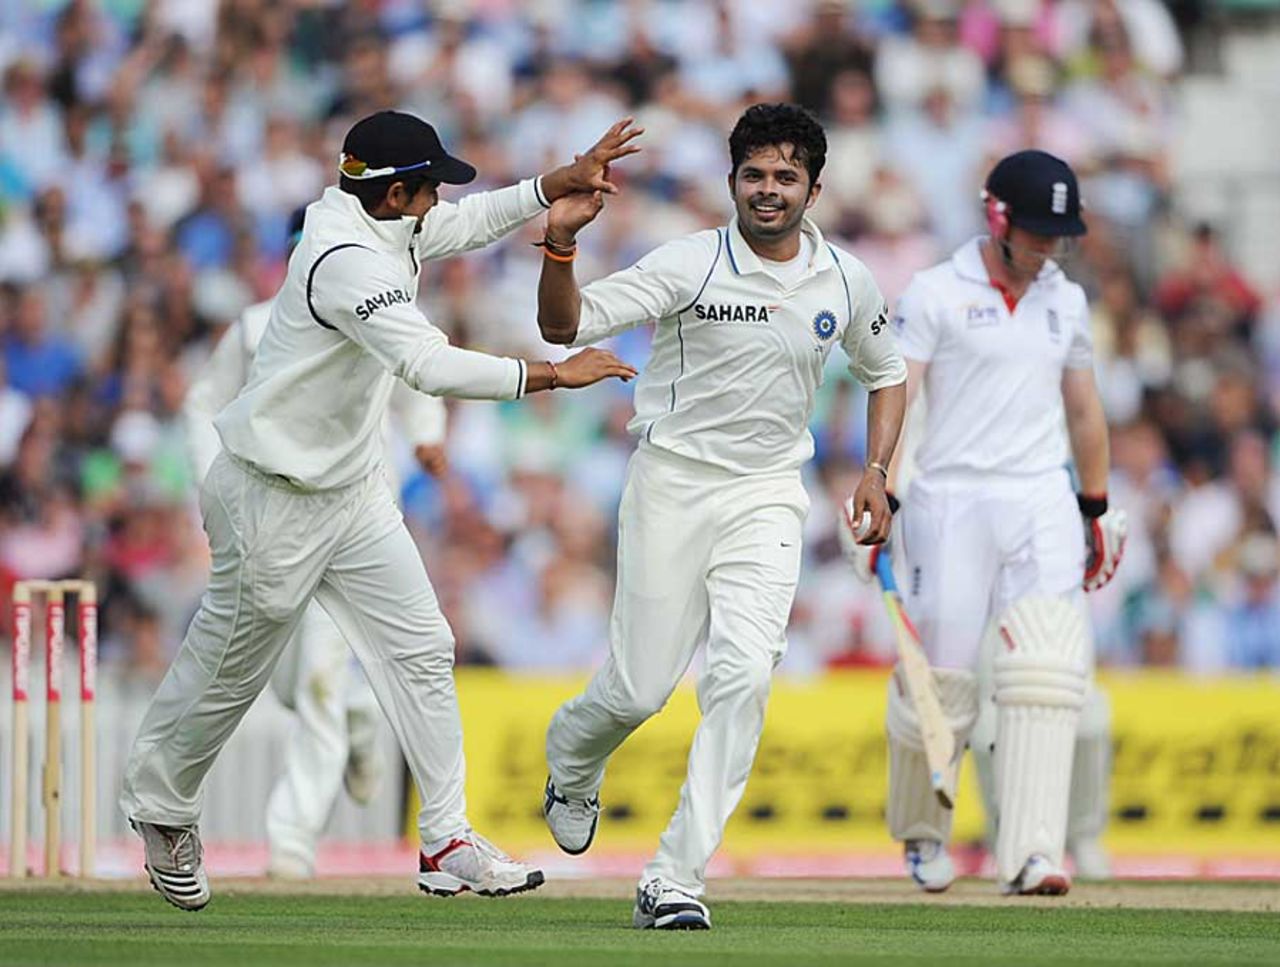 Sreesanth picked up a couple of early wickets on the third day, England v India, 4th Test, The Oval, 3rd day, August 20, 2011